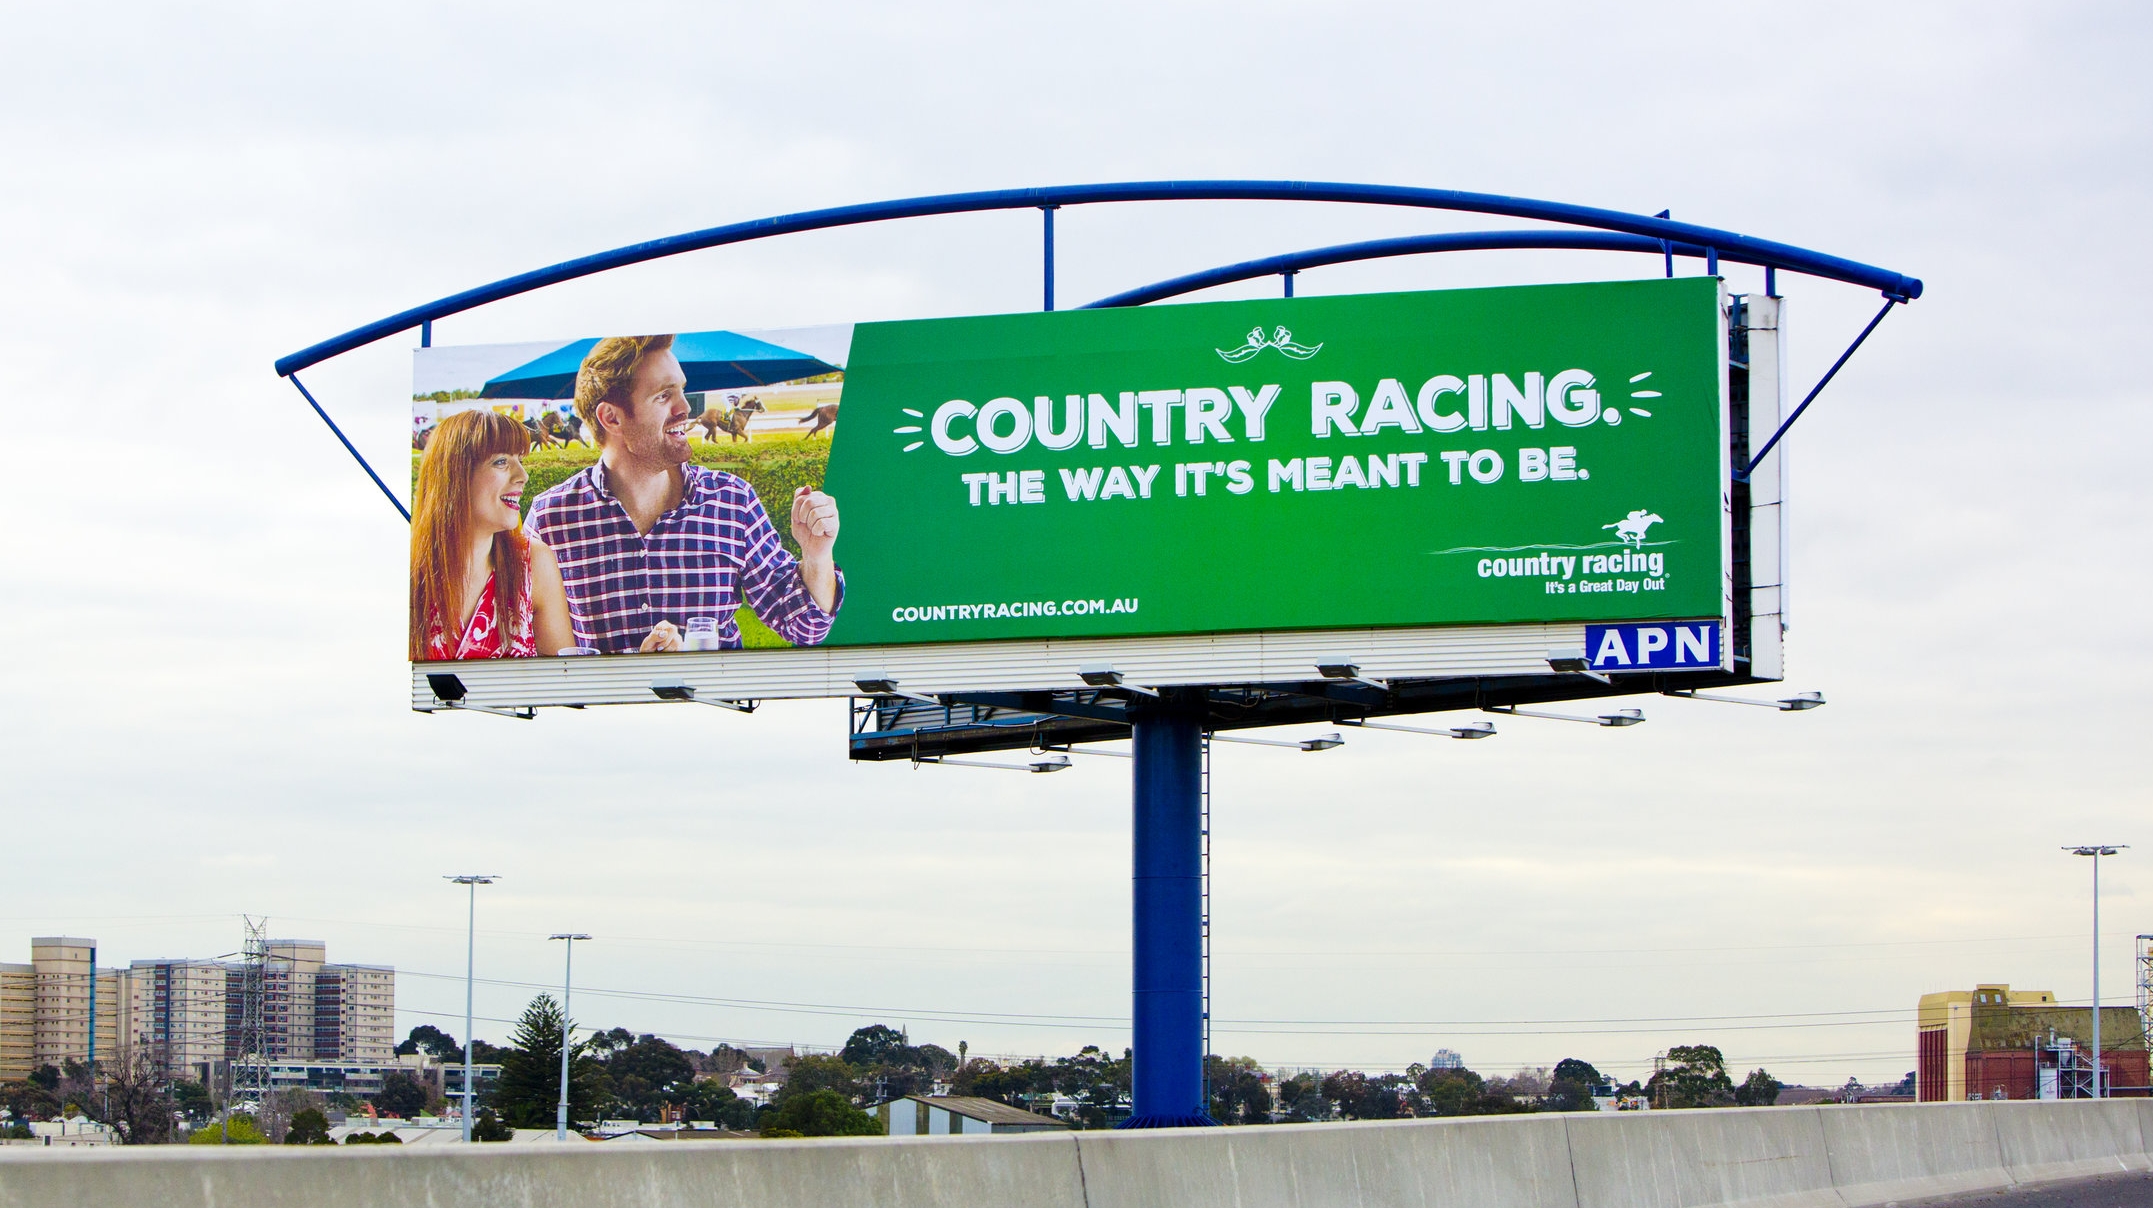 WE ARE BALANCE / COUNTRY RACING VICTORIA